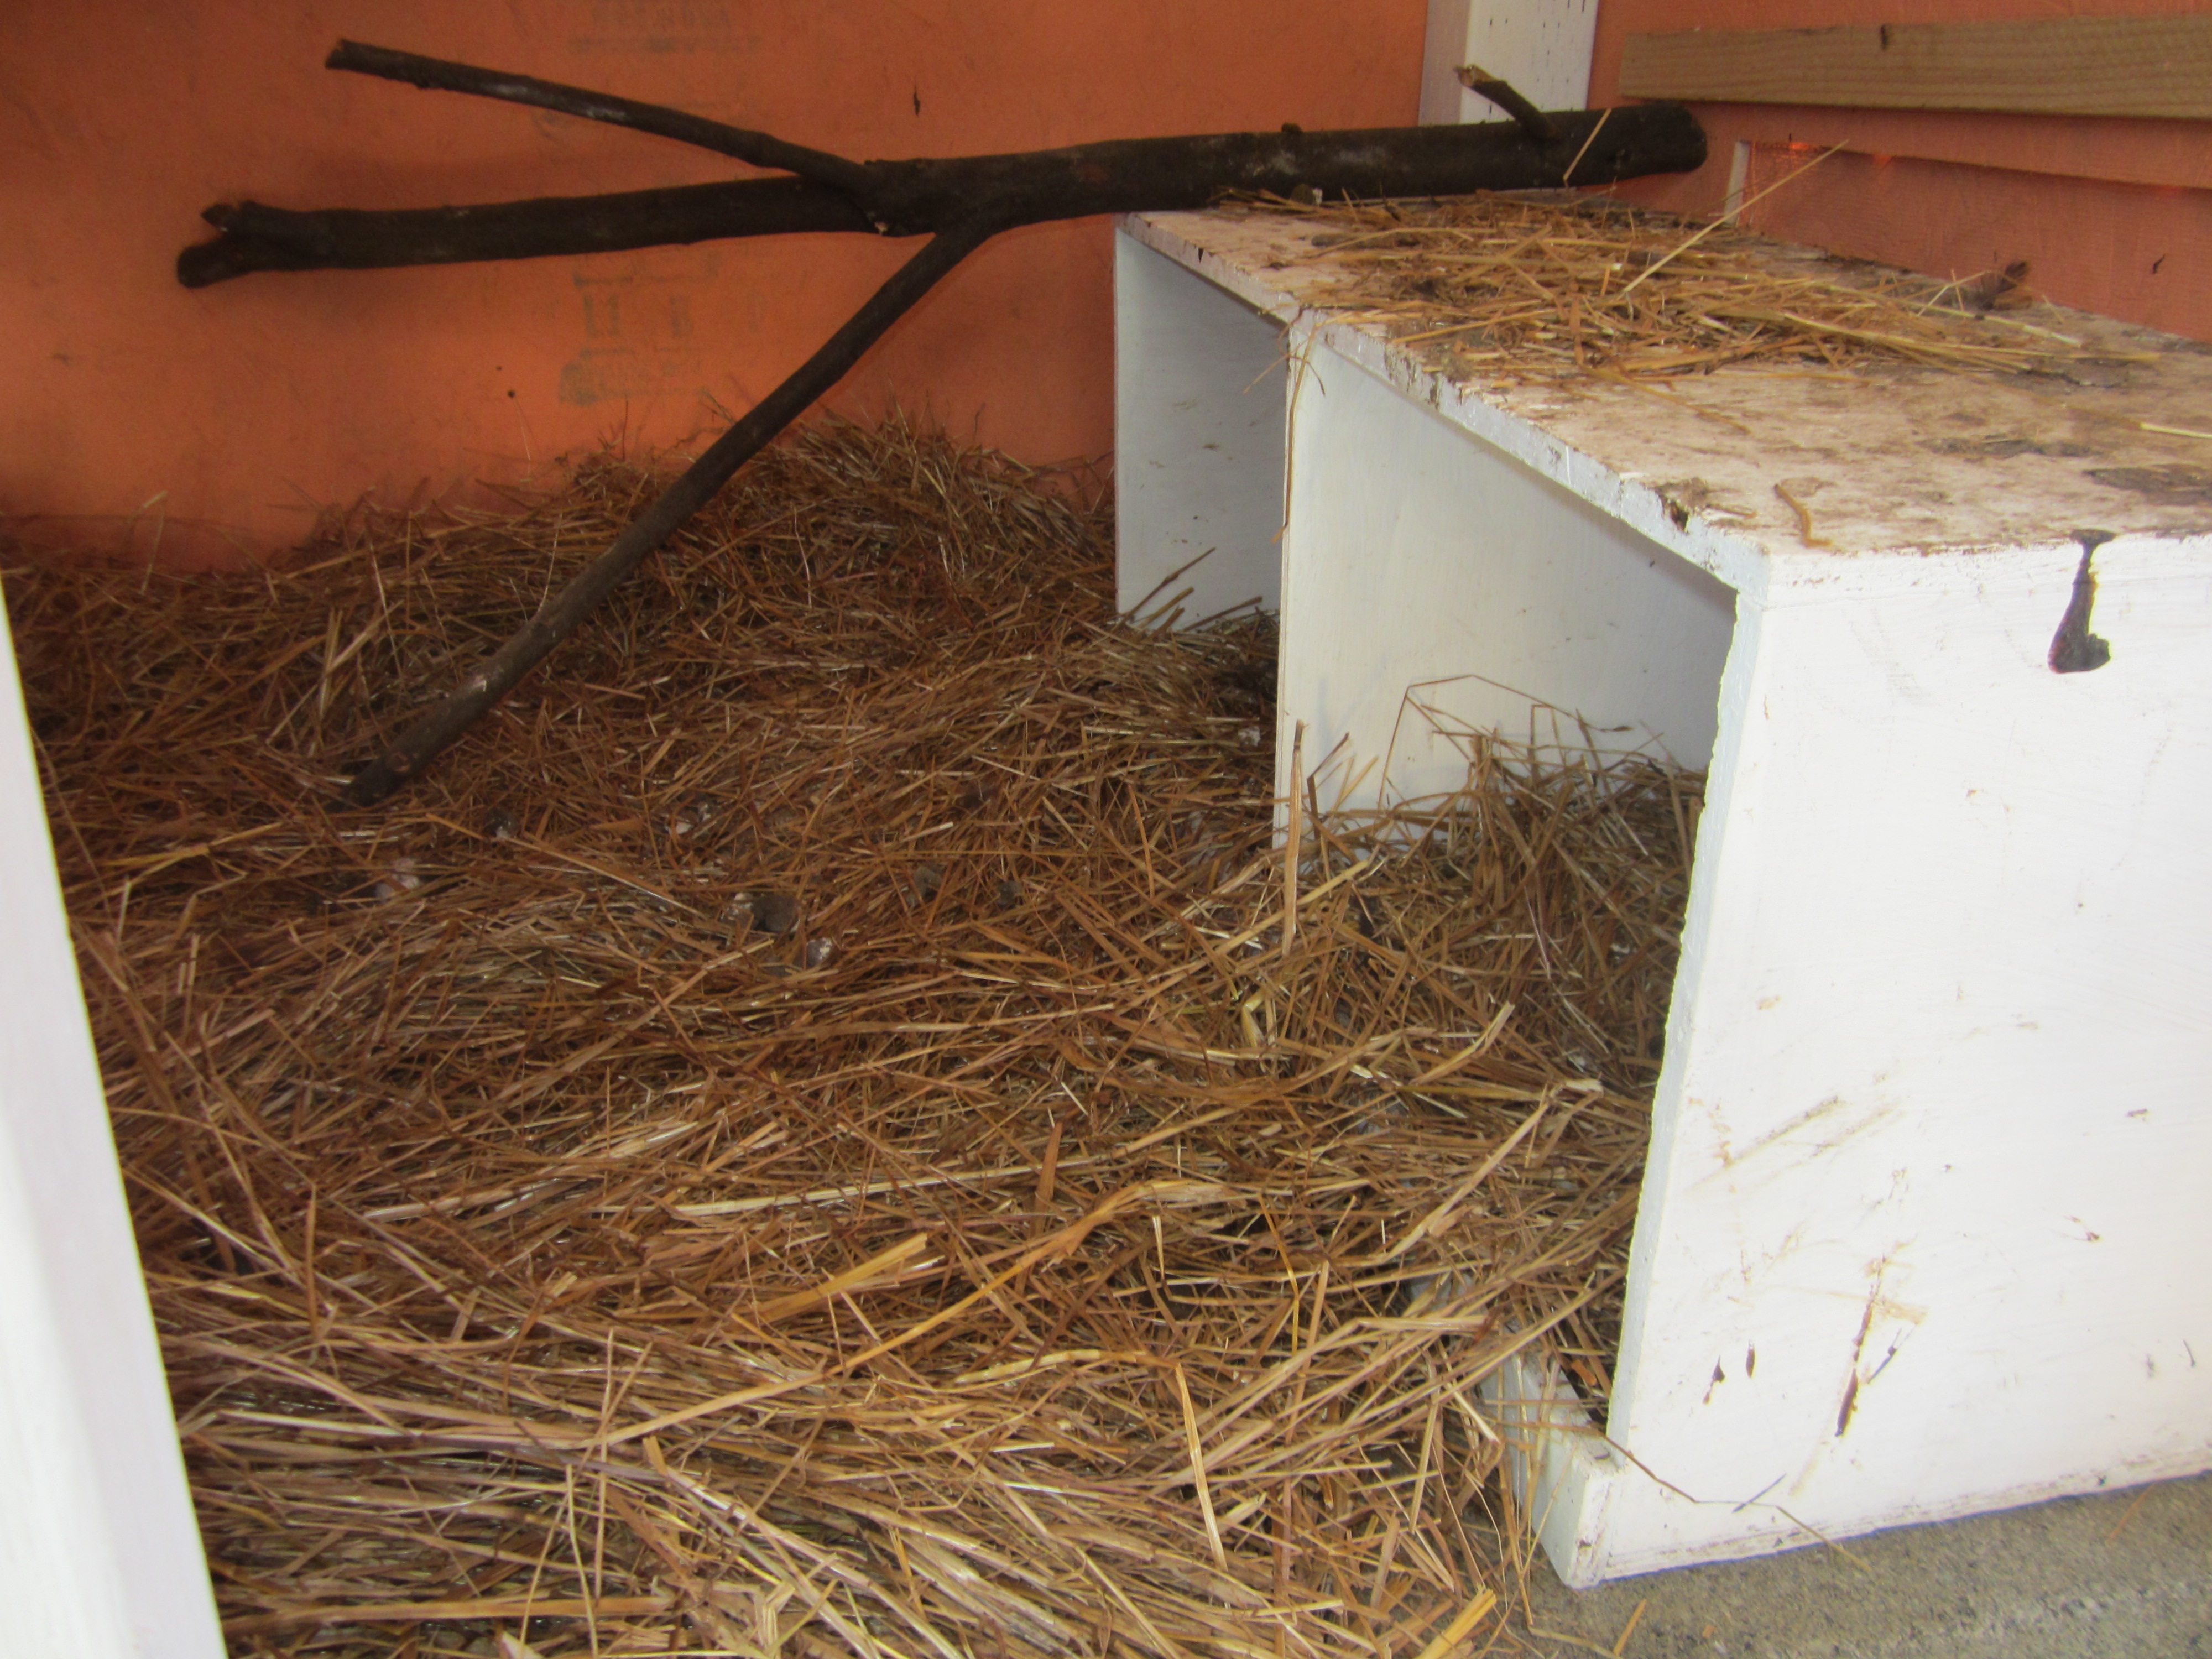 Inside of roost with nest boxes. The nest boxes are also up on some blocks with hay stuffed underneath to further insulate them since they tend to sleep in the boxes